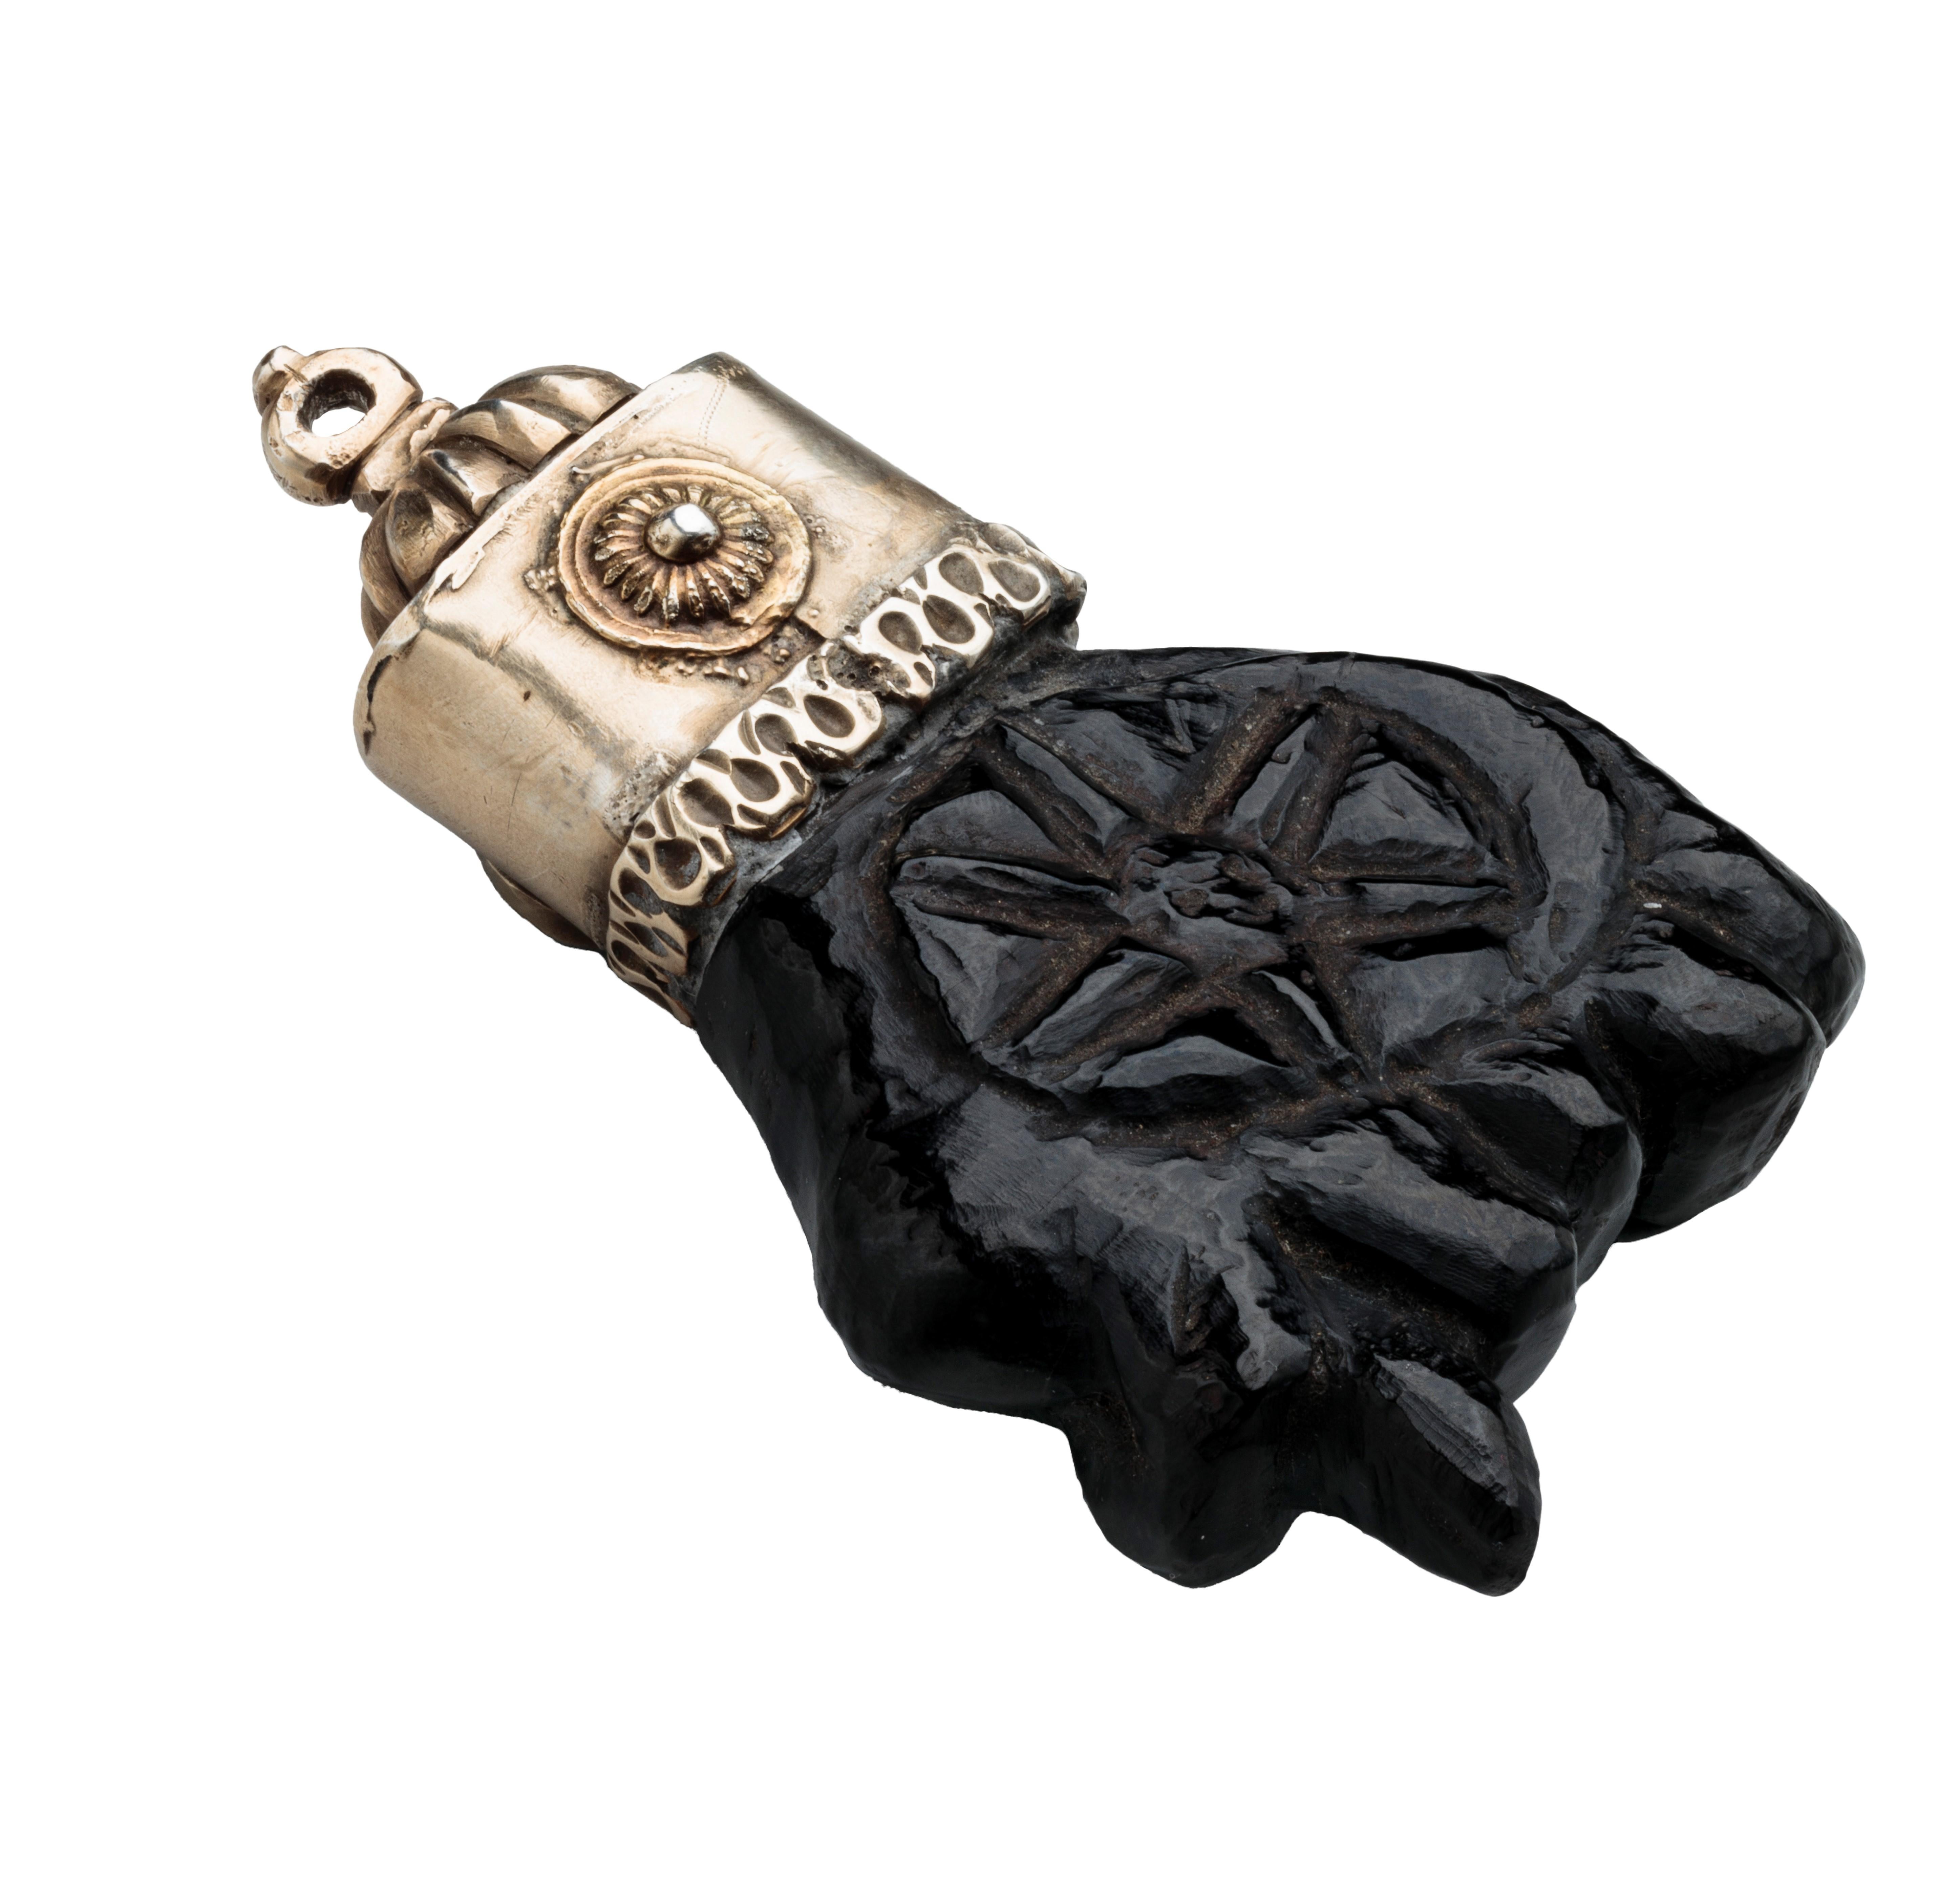 AMULET PENDANT WITH FIGA 
Spain, c. 1620–1630 
Jet, silver, and enamel 
Weight 60.7 grams; dimensions 85 × 49 × 18 mm 

Large pendant in the shape of a hand carved from jet with a clinched fist in the figa (Spanish higa) gesture. In the palm of the